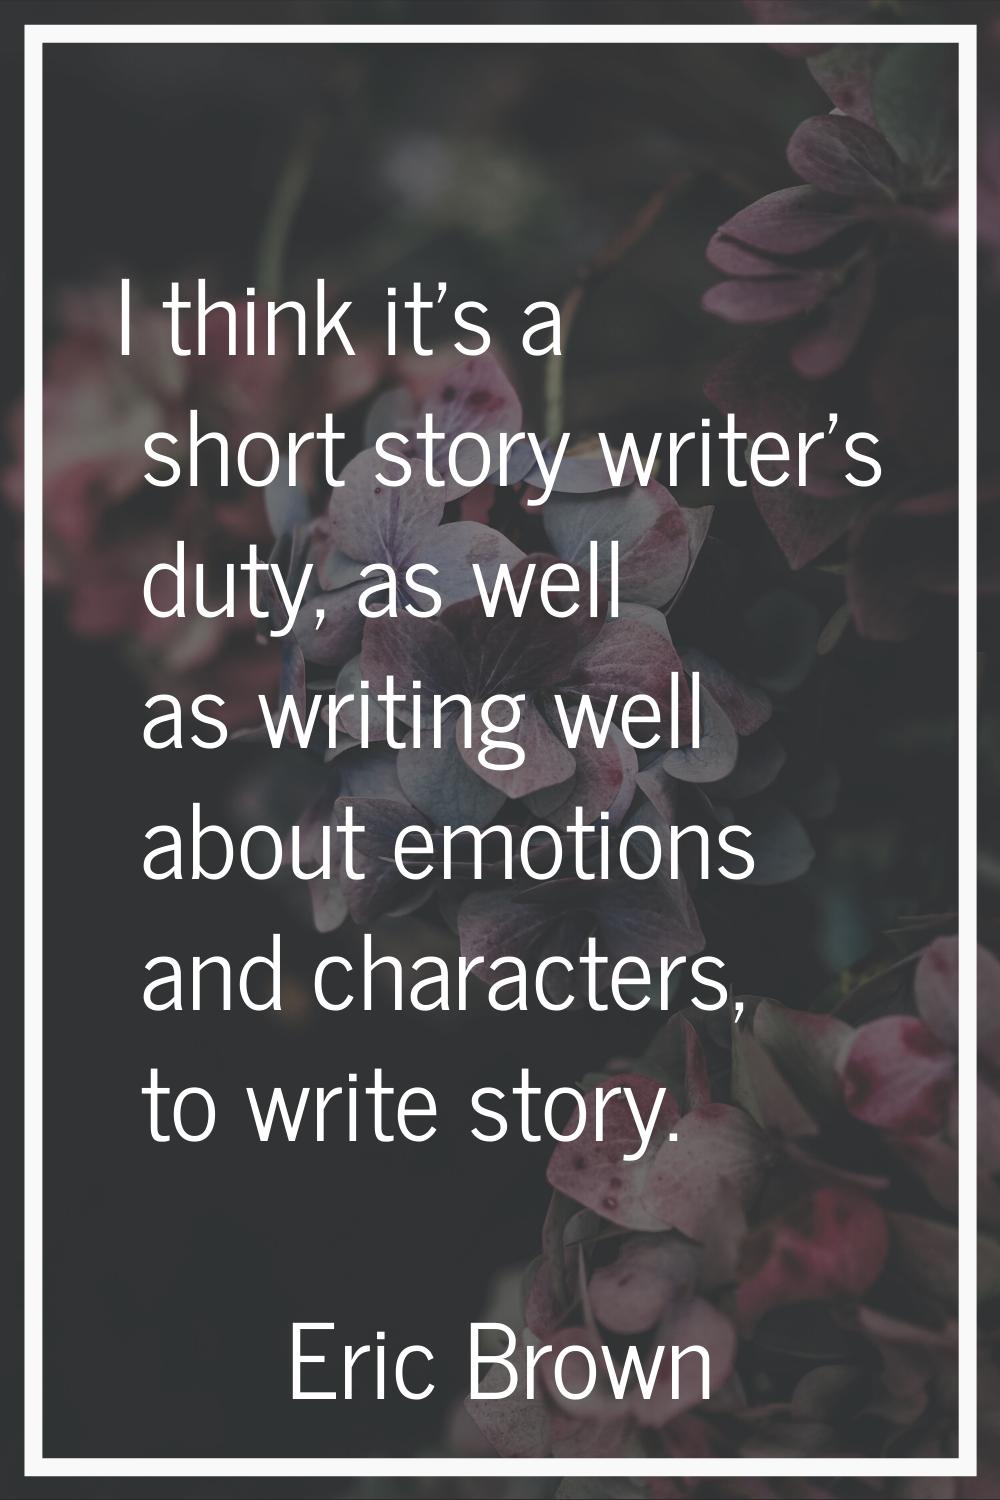 I think it's a short story writer's duty, as well as writing well about emotions and characters, to